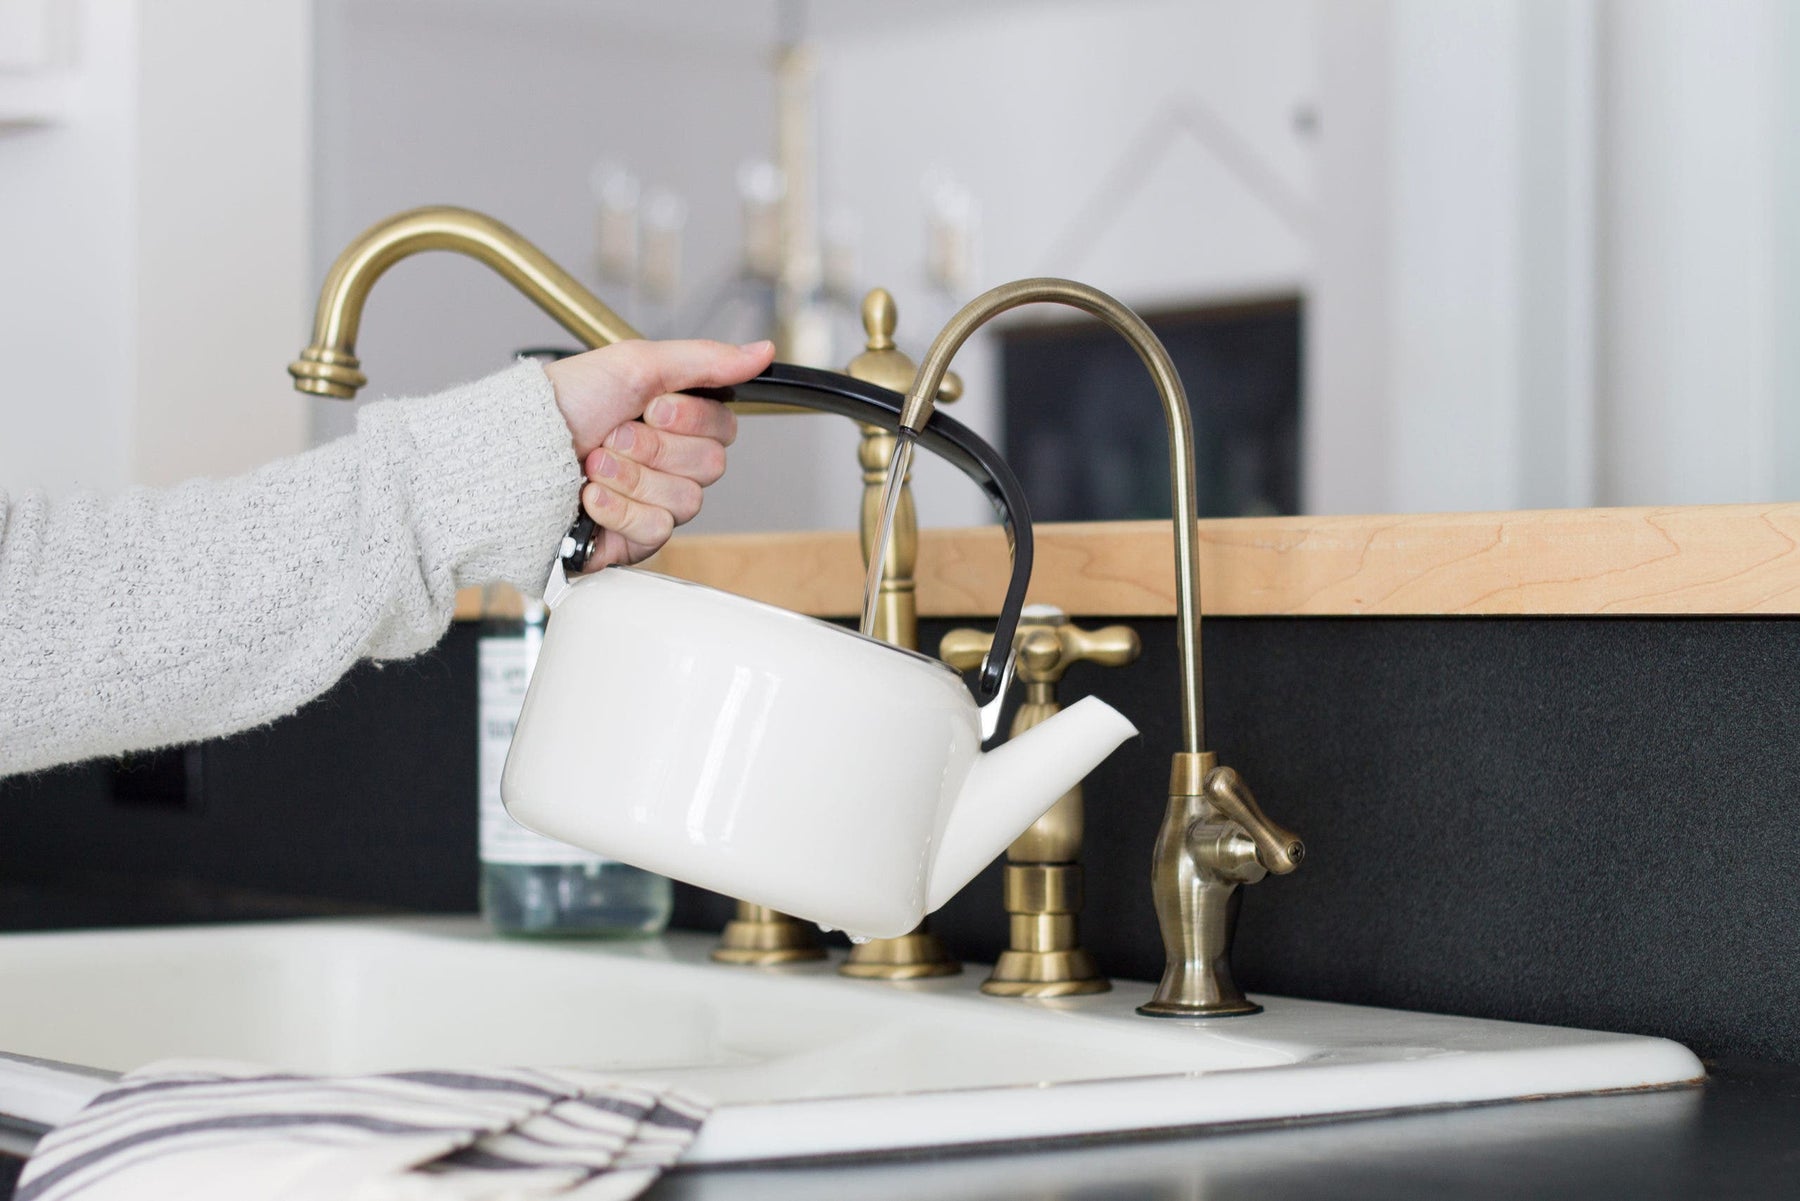 Finishes and Styles of Water Filtration Faucets